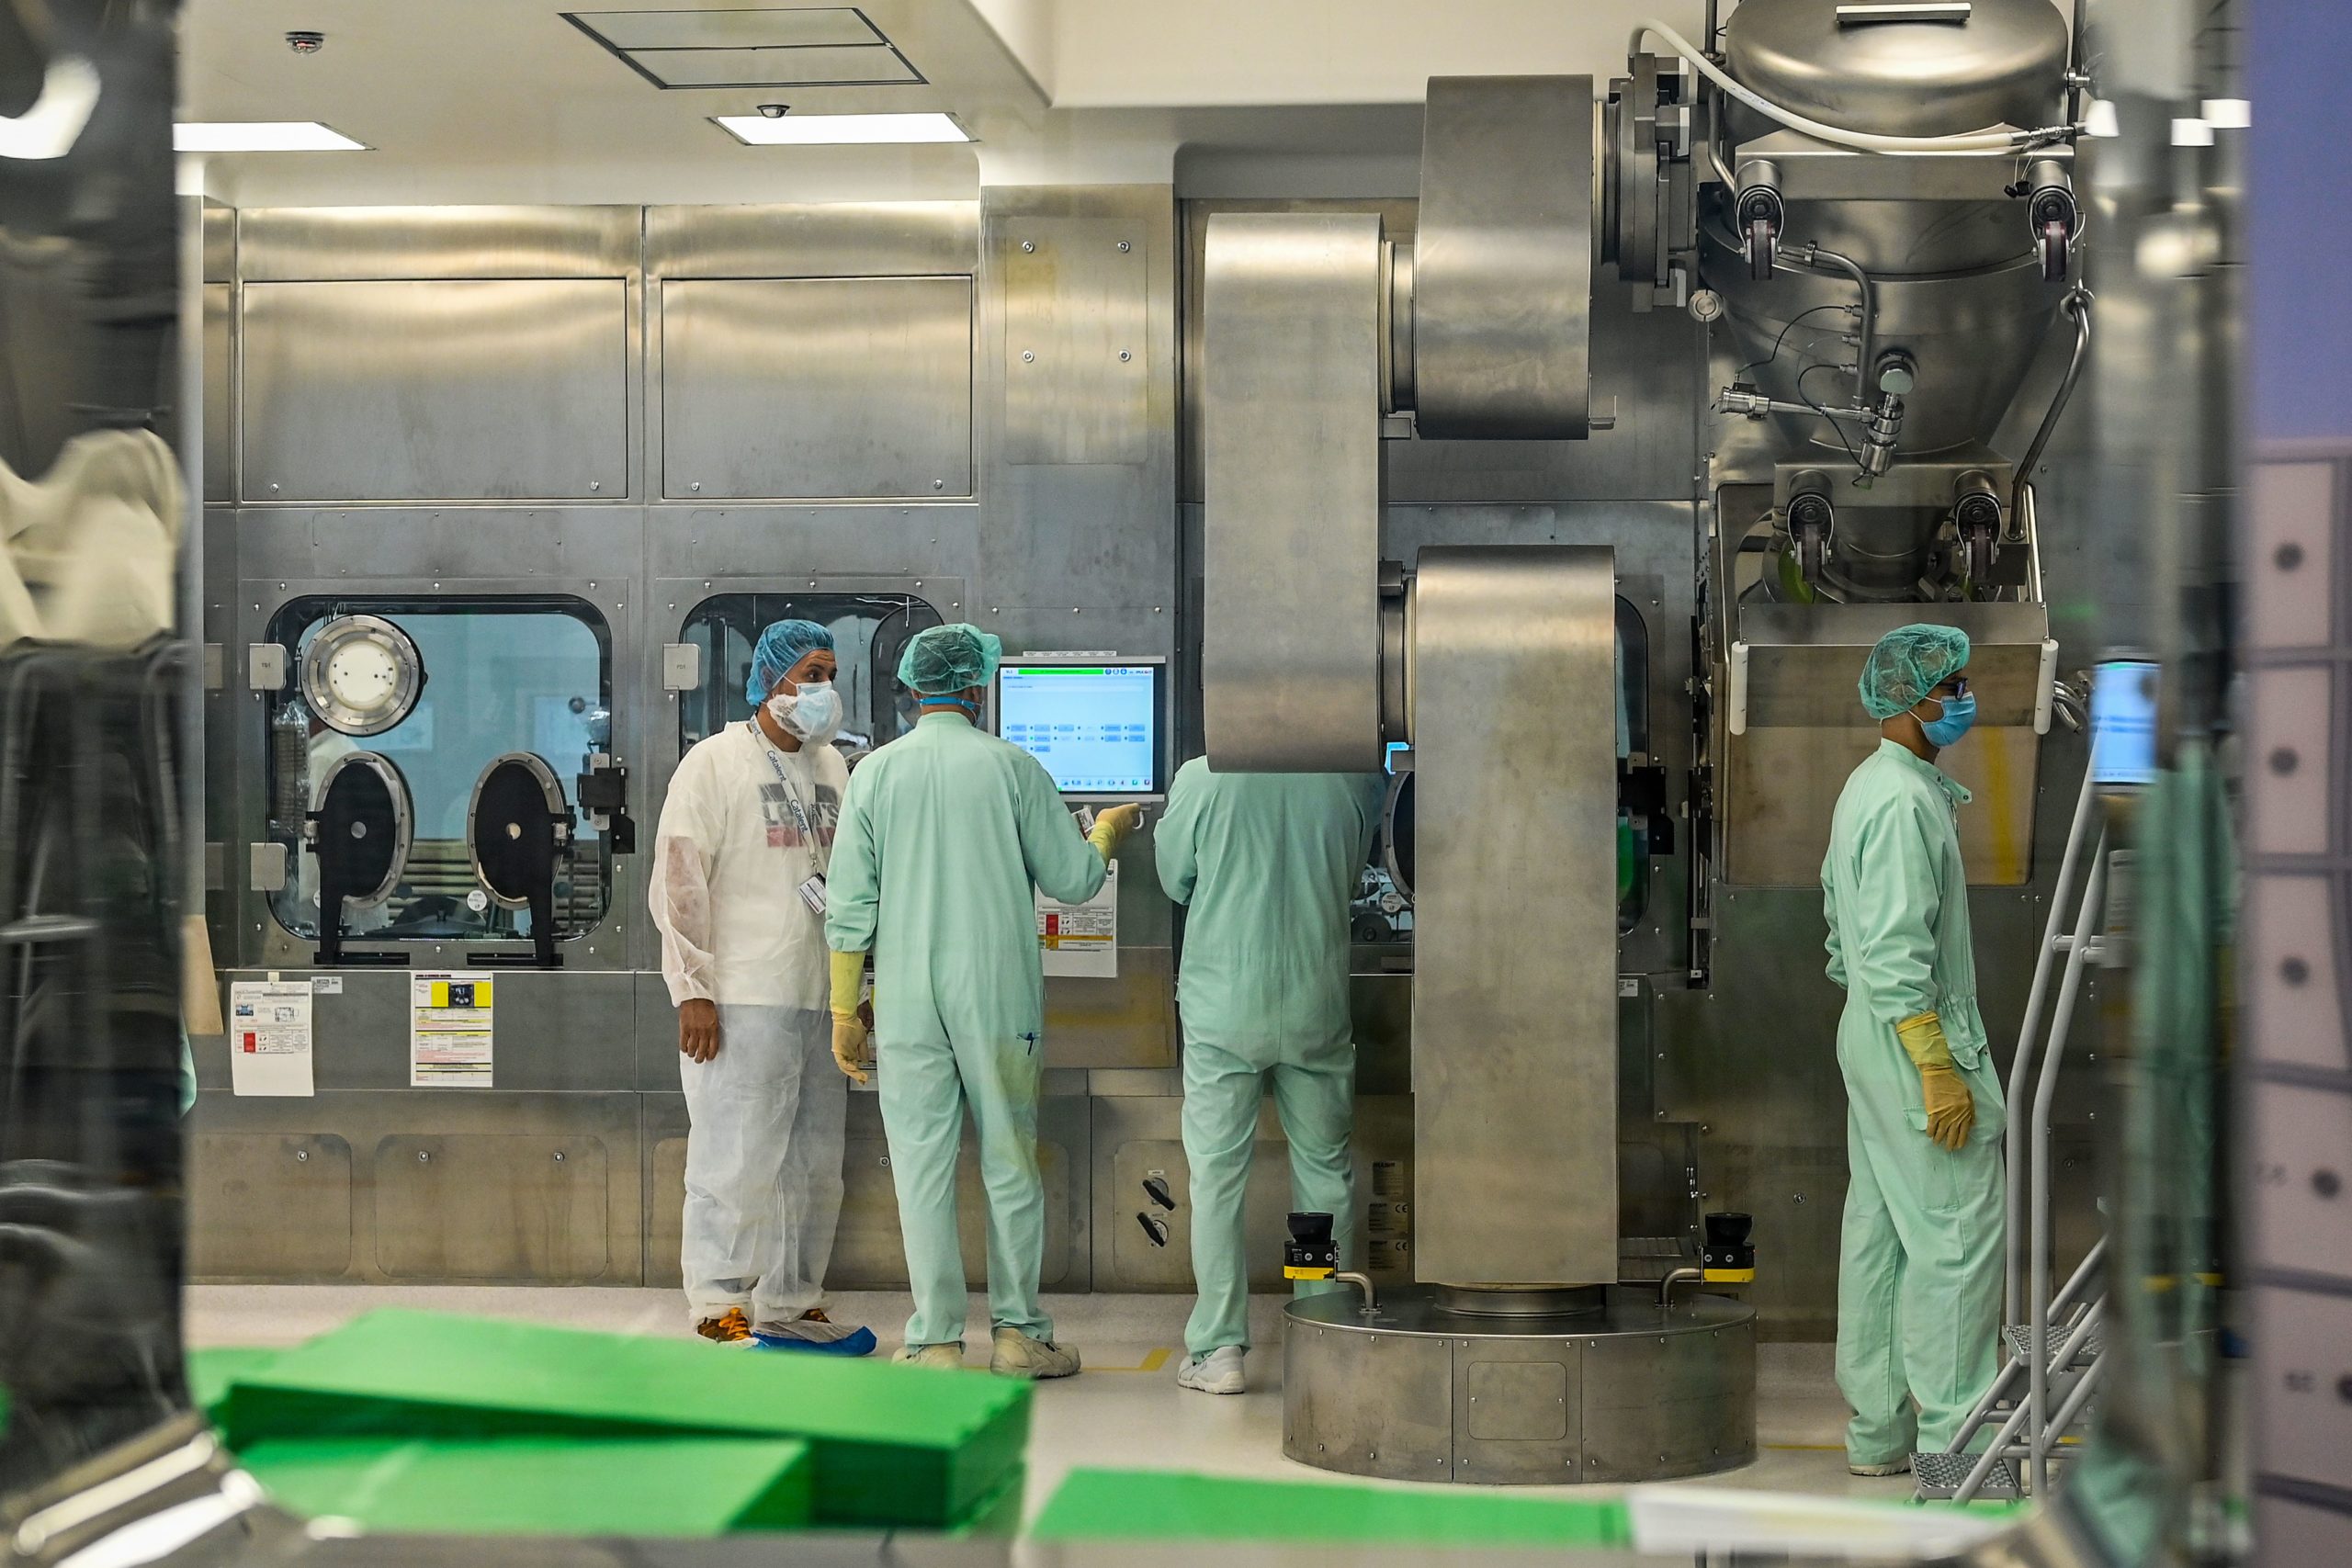 Laboratory technicians supervise filling and packaging tests for the large-scale production and supply of the University of Oxfords COVID-19 vaccine candidate, AZD1222, conducted on a high-performance aseptic vial filling line on September 11, 2020 at the Italian biologics manufacturing facility of multinational corporation Catalent in Anagni, southeast of Rome, during the COVID-19 infection, caused by the novel coronavirus. - Catalent Biologics manufacturing facility in Anagni, Italy will serve as the launch facility for the large-scale production and supply of the University of Oxfords Covid-19 vaccine candidate, AZD1222, providing large-scale vial filling and packaging to British-Swedish multinational pharmaceutical and biopharmaceutical company AstraZeneca. (Photo by Vincenzo PINTO / AFP) (Photo by VINCENZO PINTO/AFP via Getty Images)